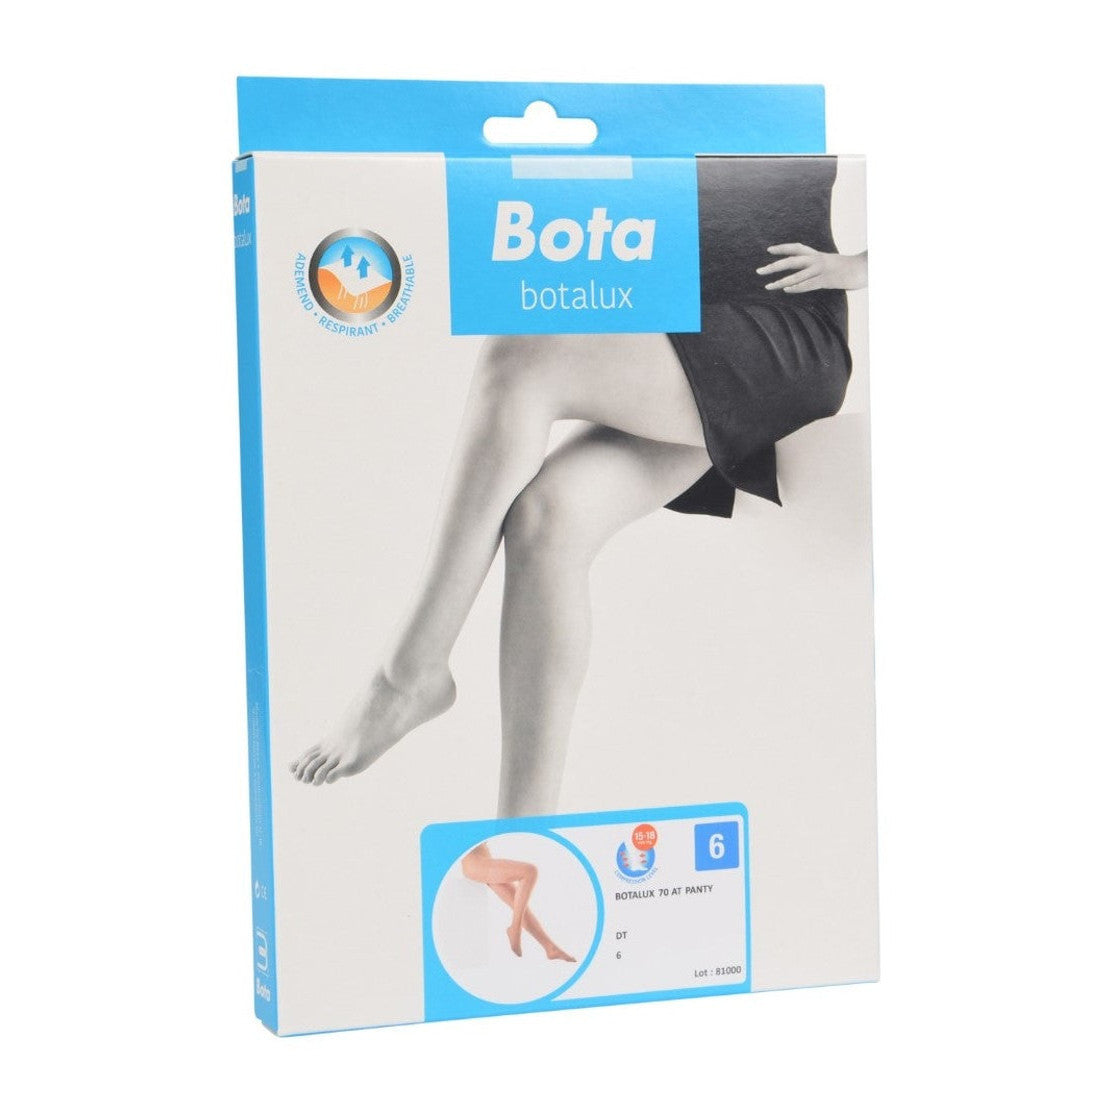 Botalux 70 support tights at dark